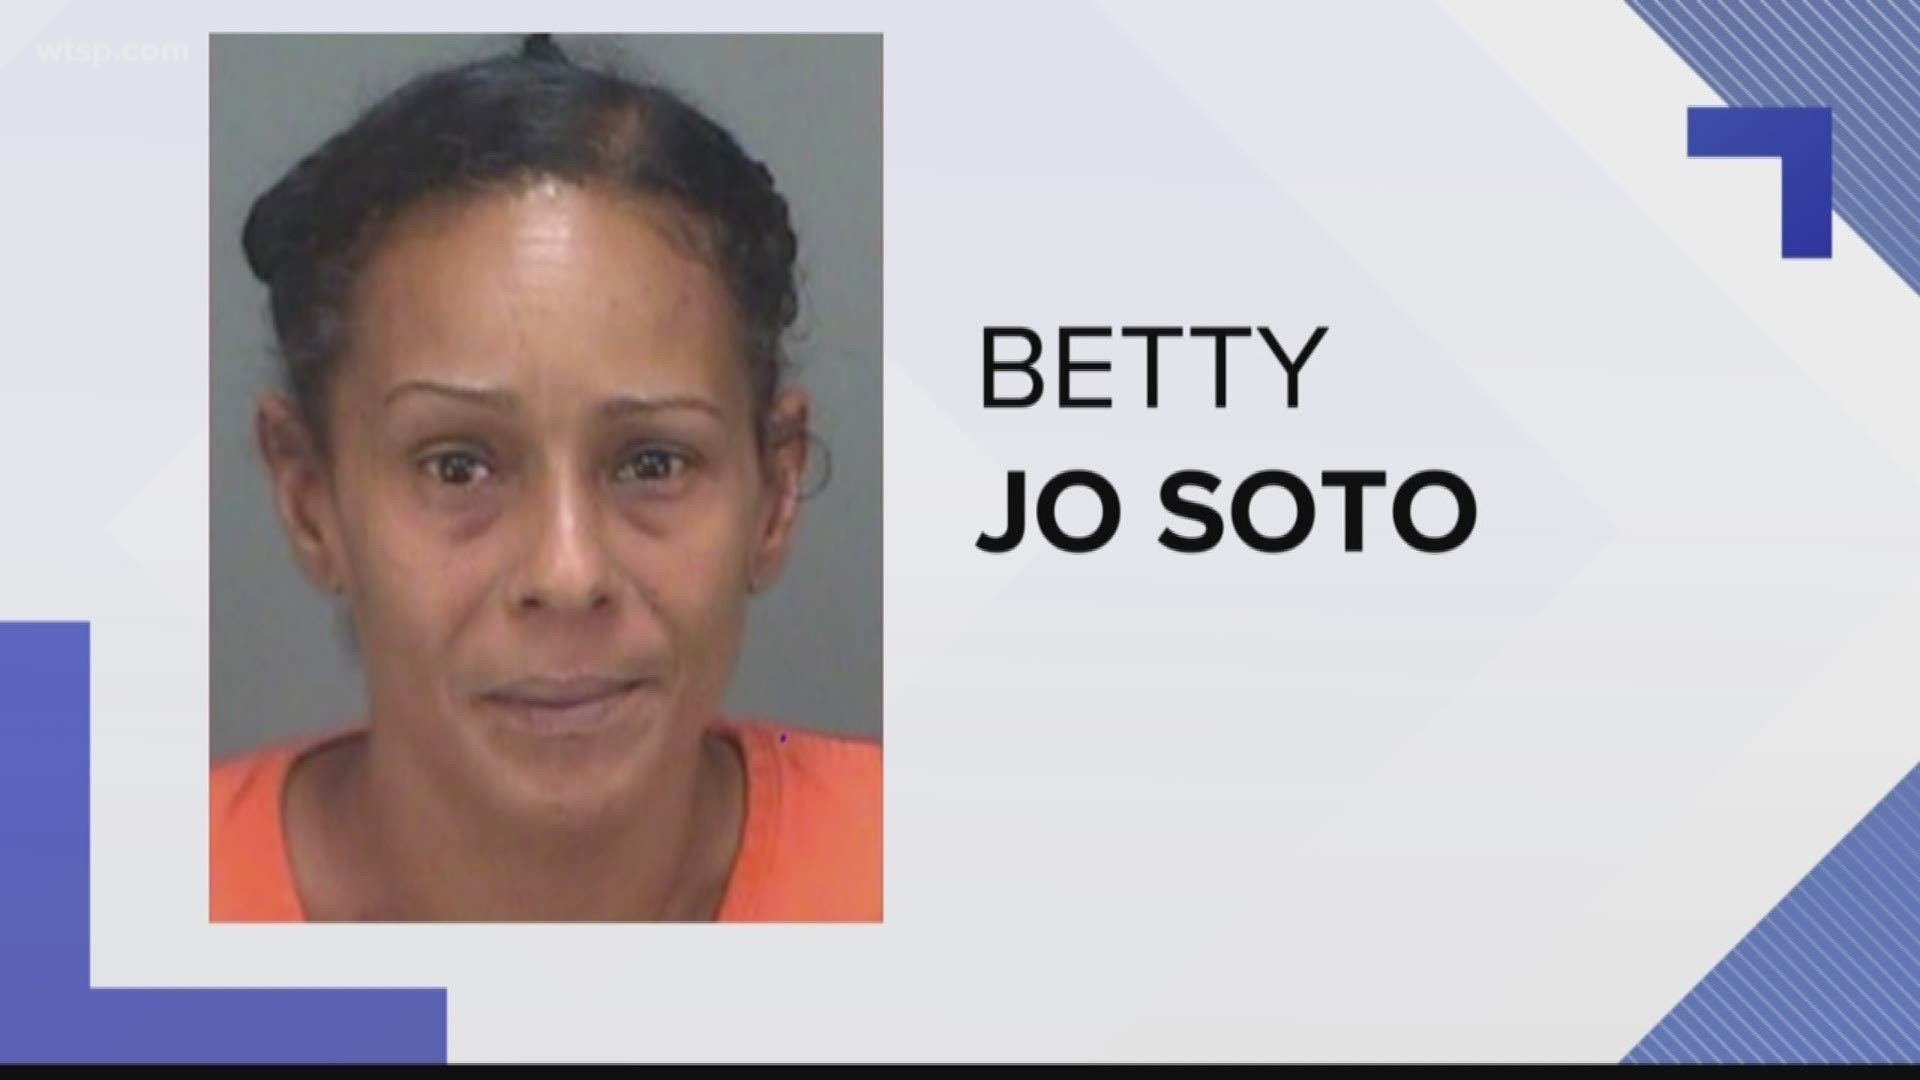 Pinellas County School police arrested a teacher at Starkey Elementary School today on two charges of carrying a concealed weapon.

Betty Jo Soto, 49, who teaches fourth grade, is currently being booked at the Pinellas County Jail.

The charges are reportedly misdemeanors.

Police said staff members noticed she was acting suspiciously and keeping her backpack close to her, so they notified campus police.